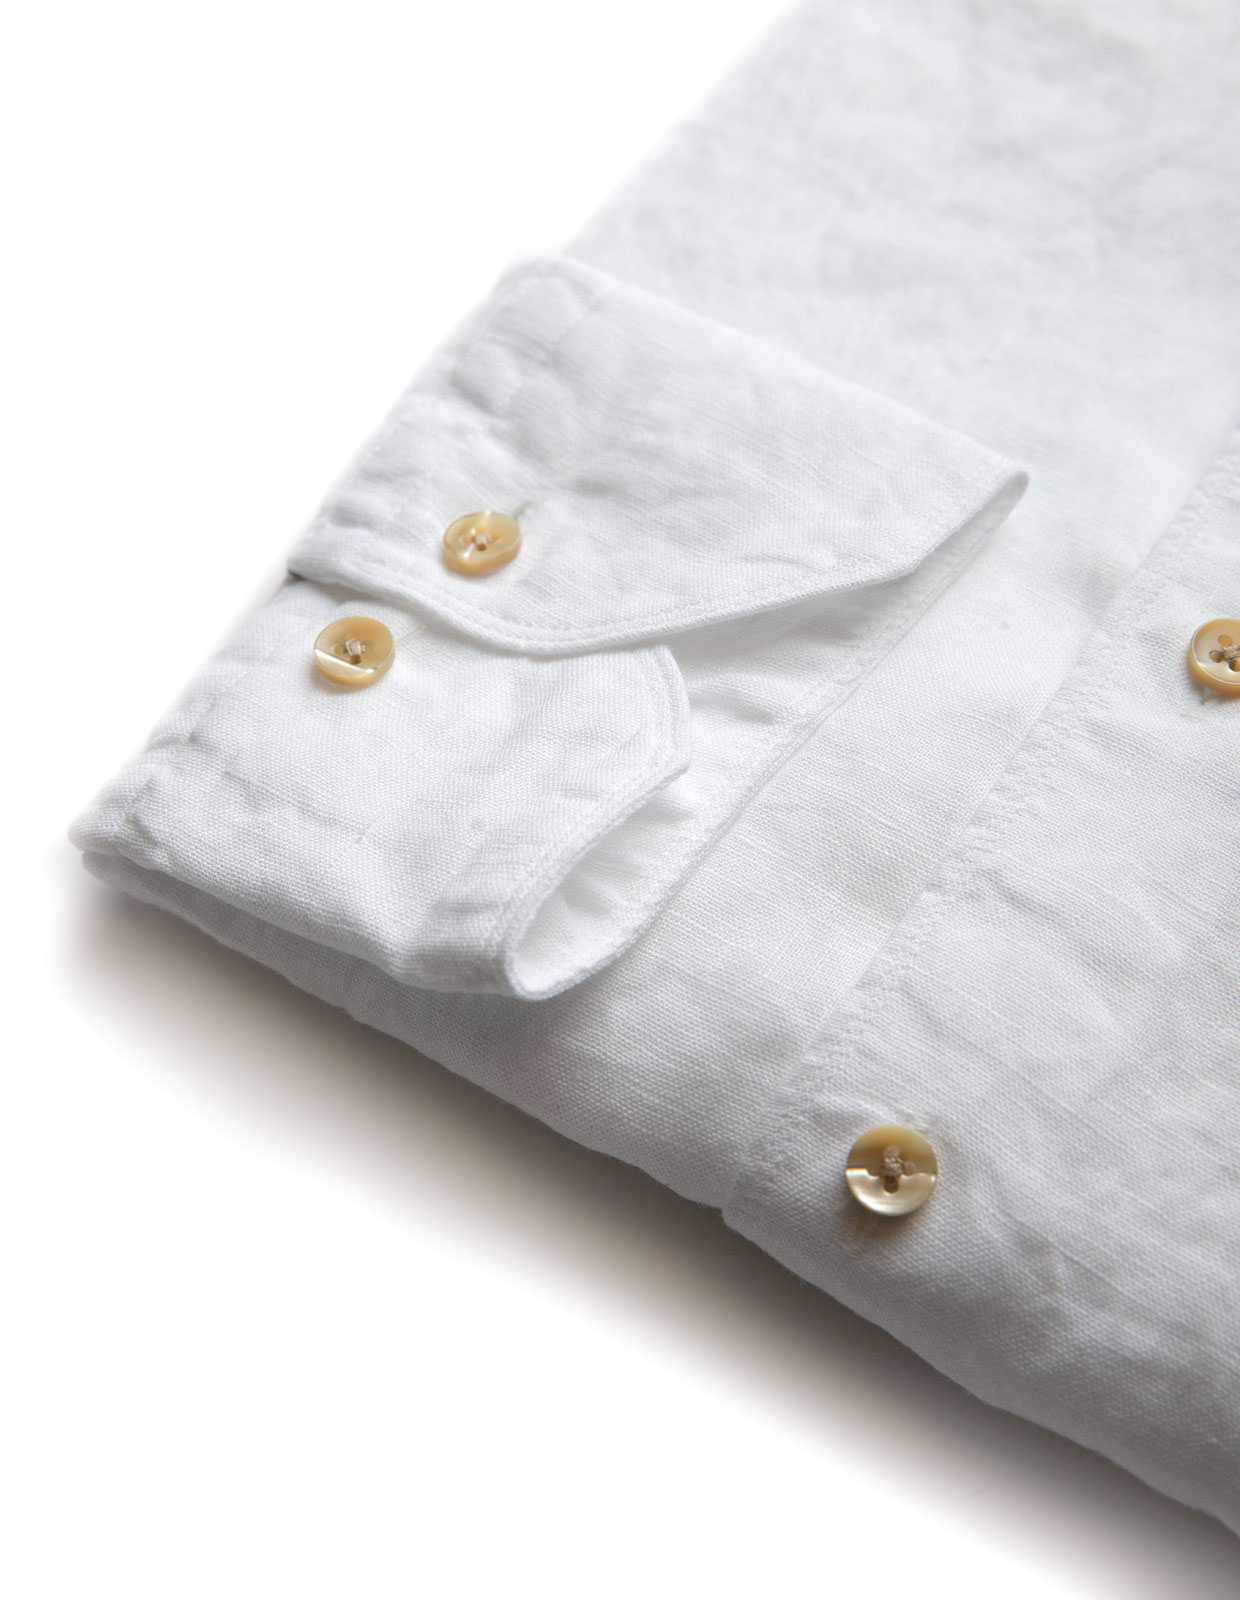 Fitted Body Linen Shirt White Stl M